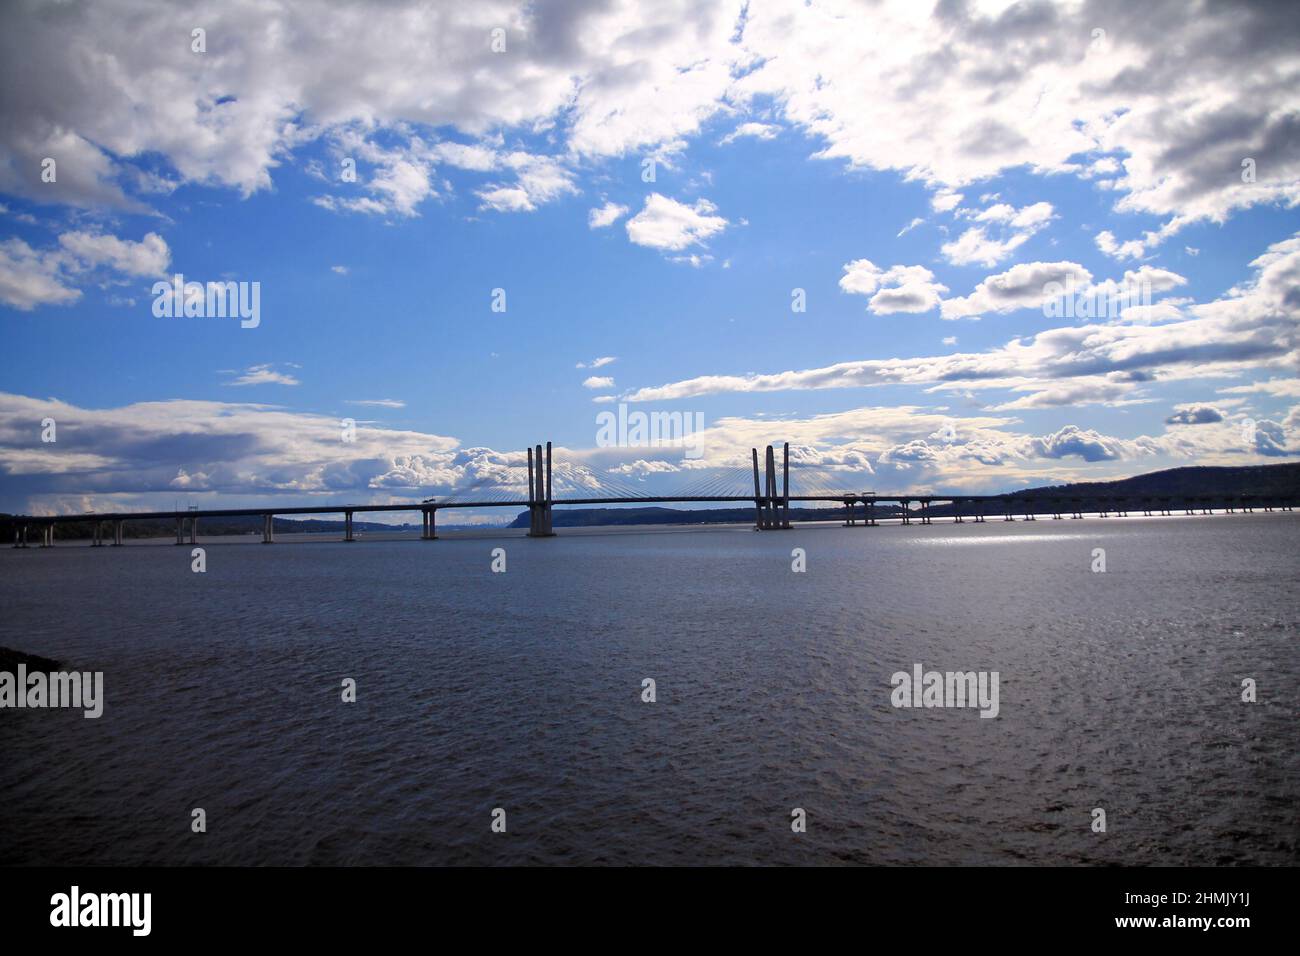 Dramatic picture of the Governator Cuomo bridge with blue sky and white clouds on the Hudson River in the New York State Stock Photo